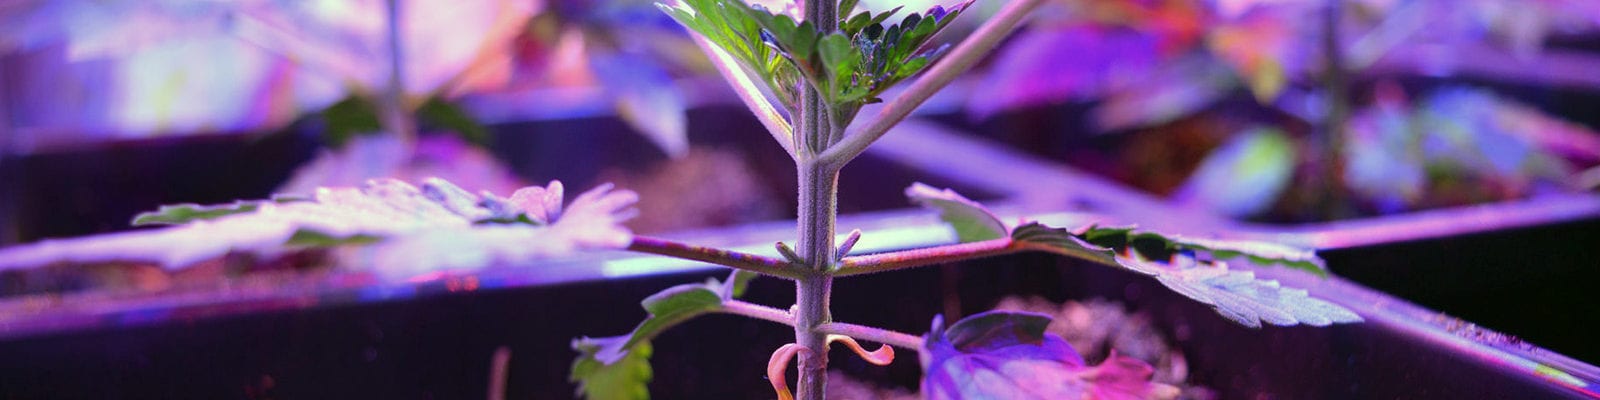 A young cannabis plant showing signs of growth under an LED grow light.